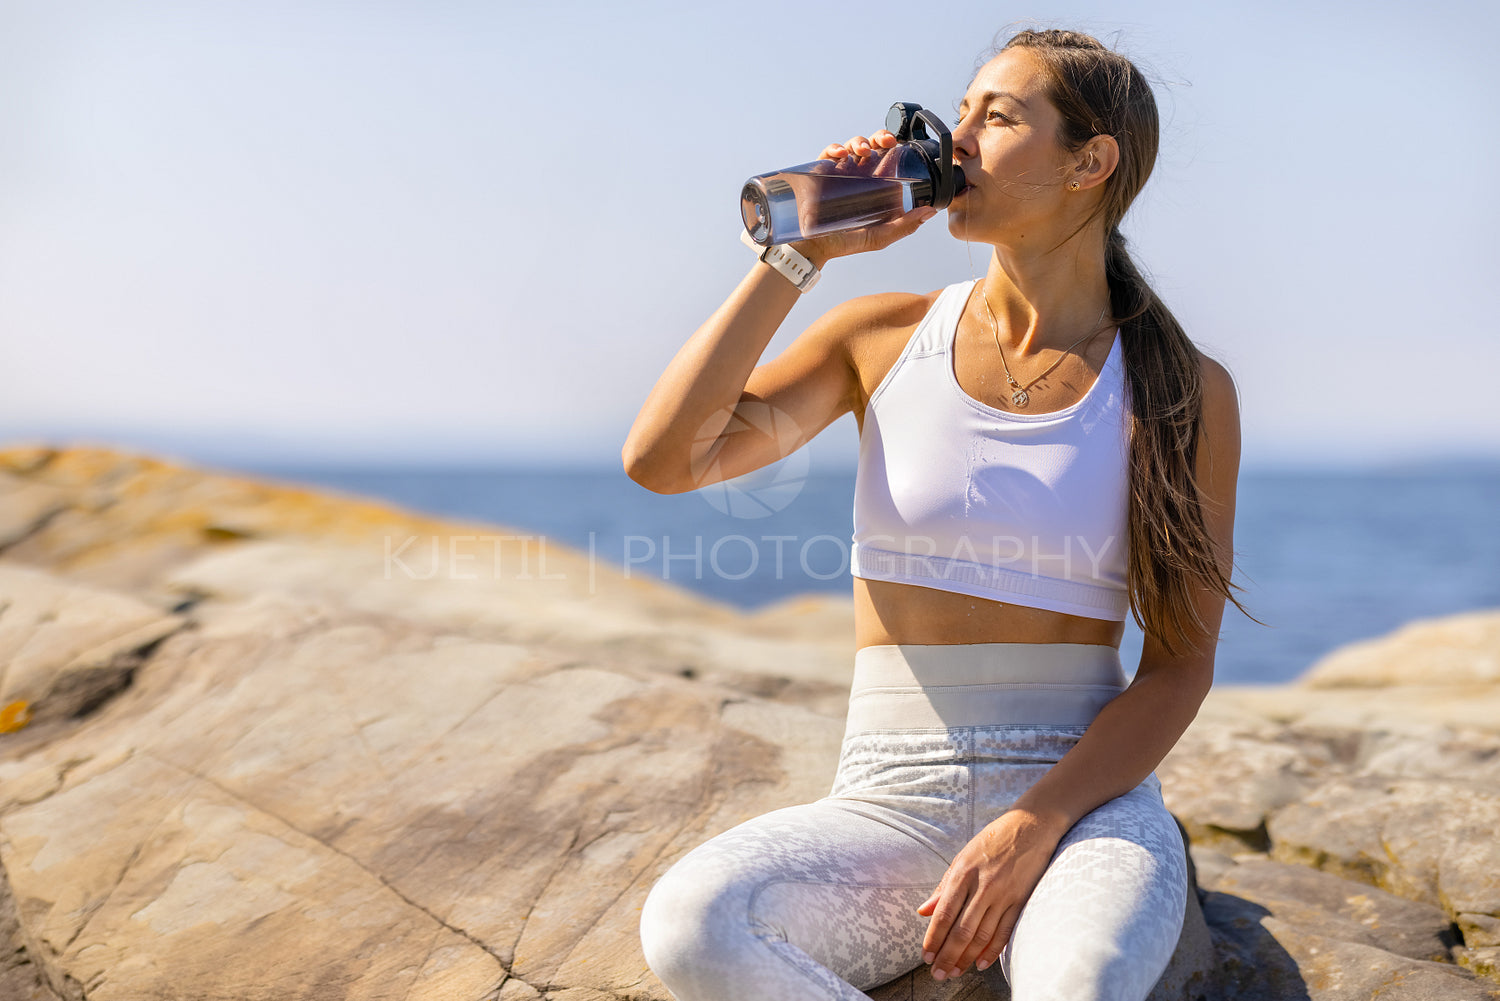 Female Athlete Drinking Water During Outdoor Workout by the Sea